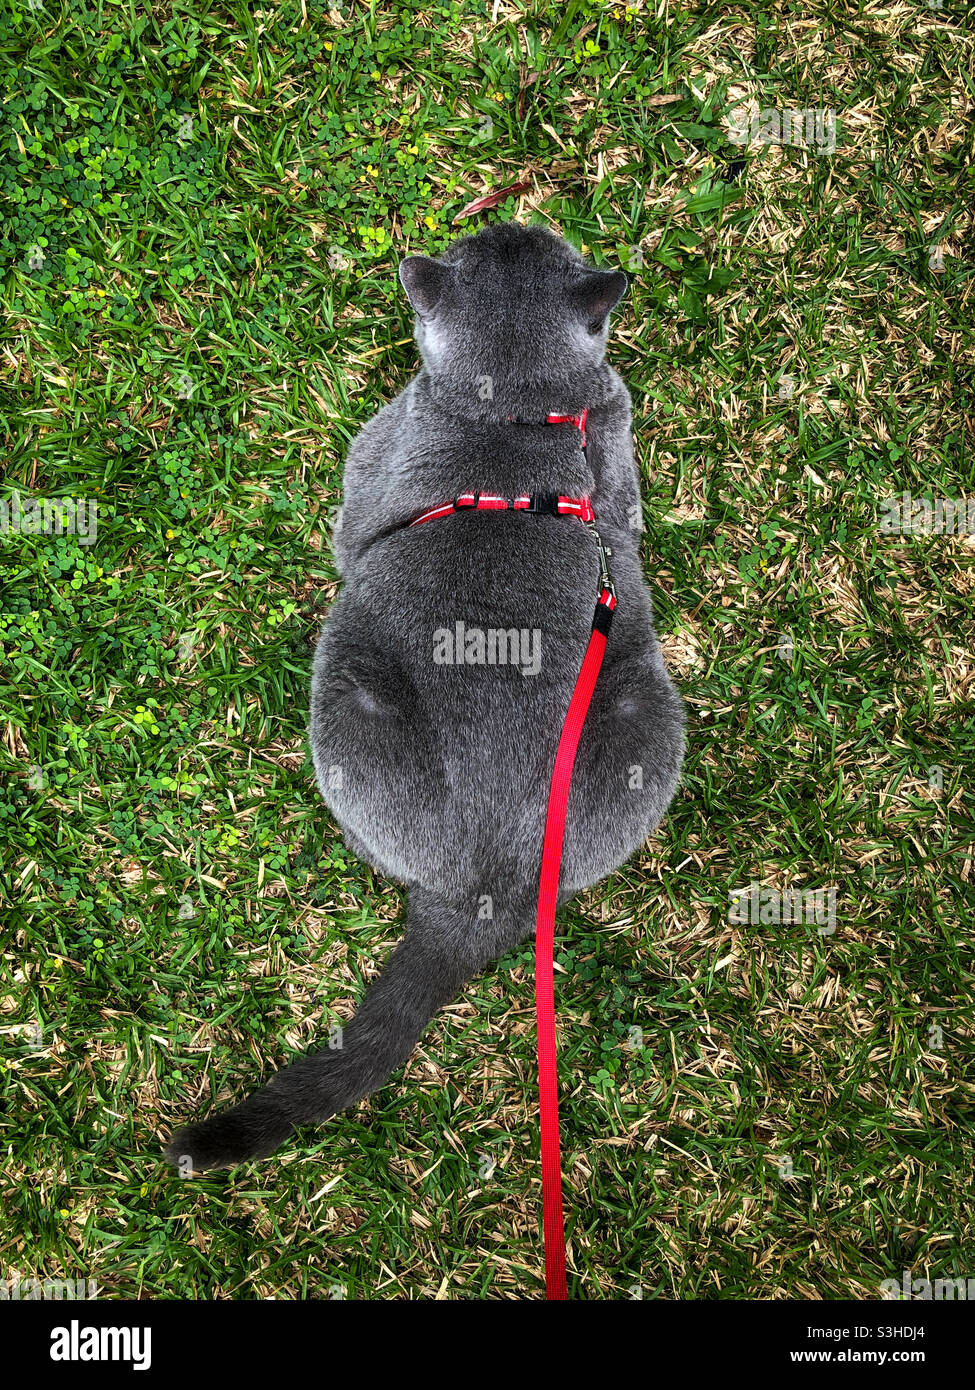 Cat on a leash seen from above, on the grass Stock Photo